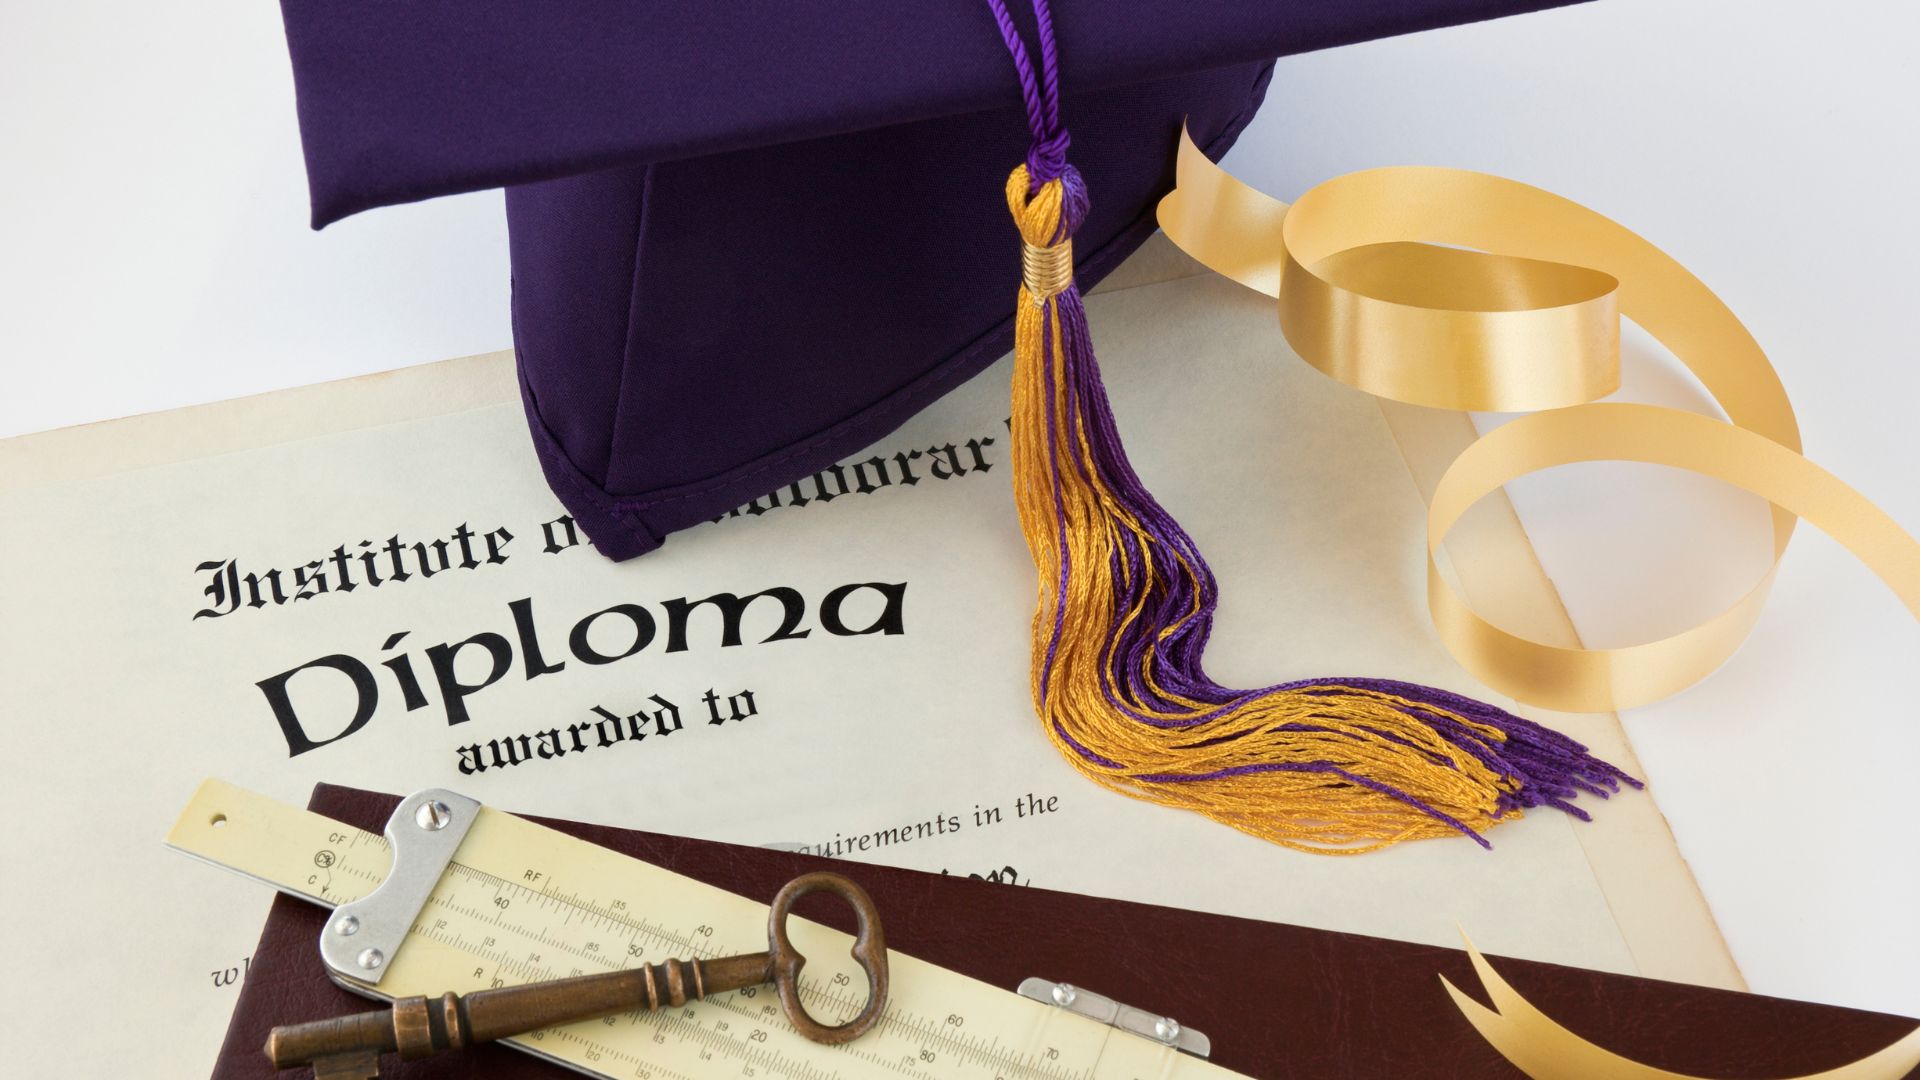 college diploma with brass skeleton key on a table next to a purple and yellow graduate cap and gold ribbon